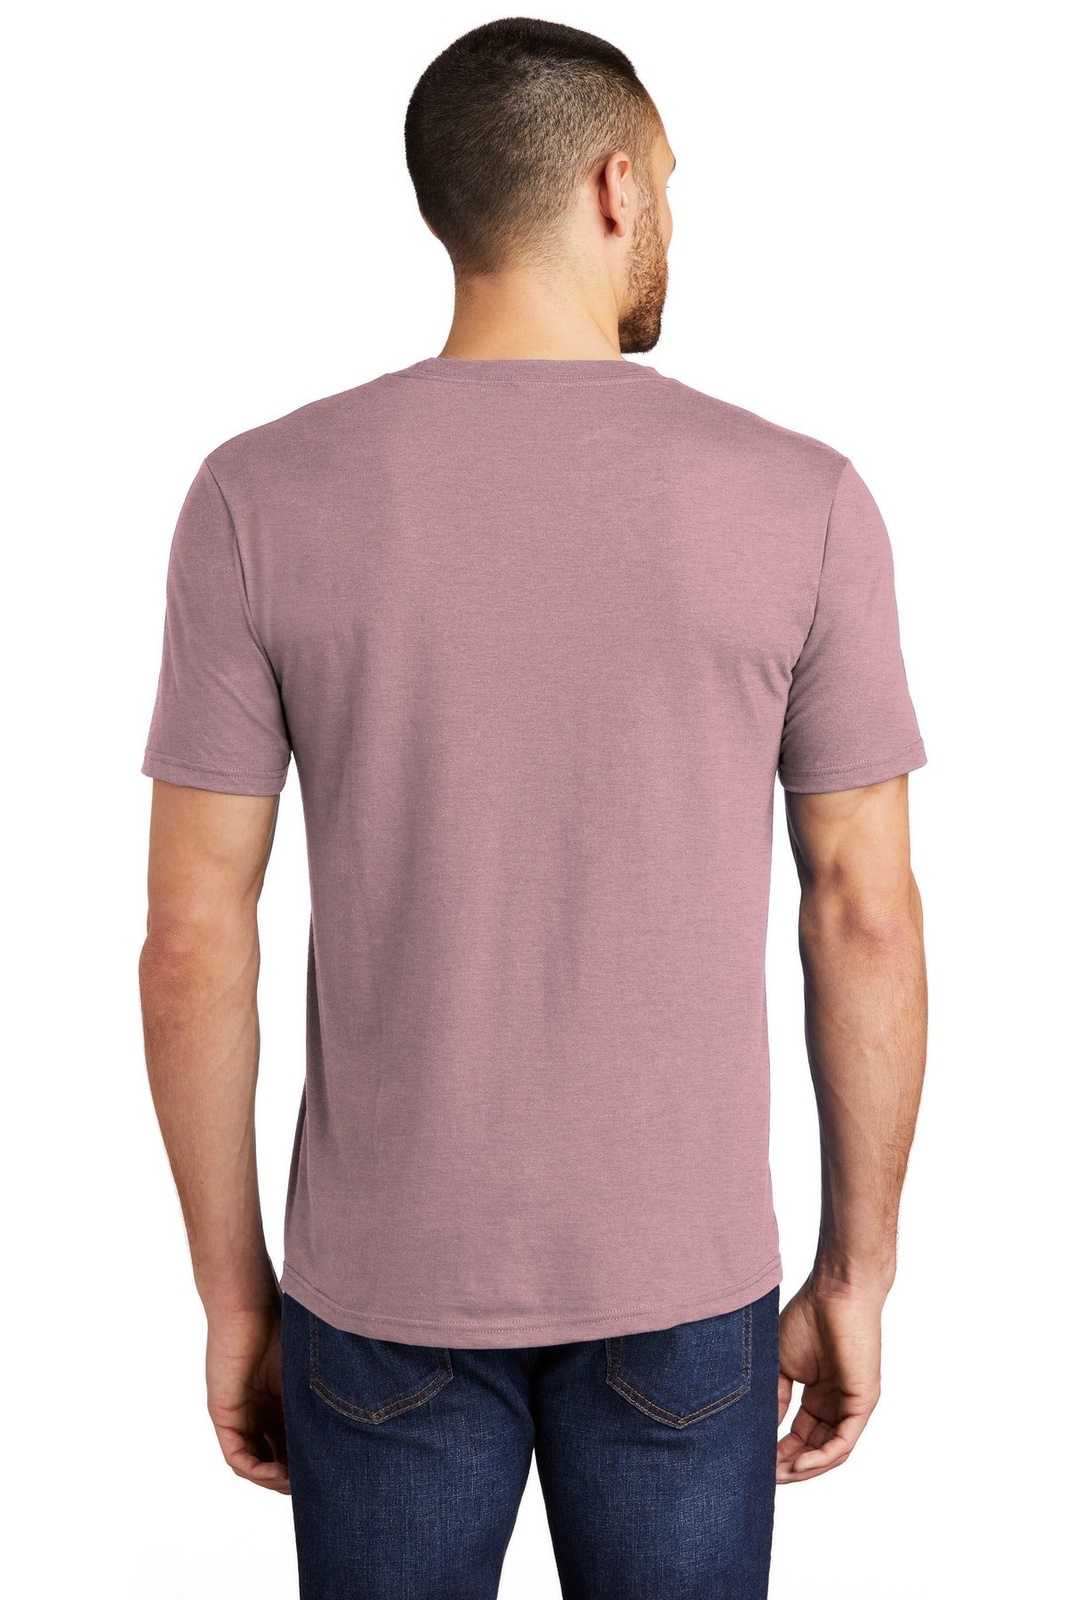 District DM130 Perfect Tri Tee - Heathered Lavender - HIT a Double - 2